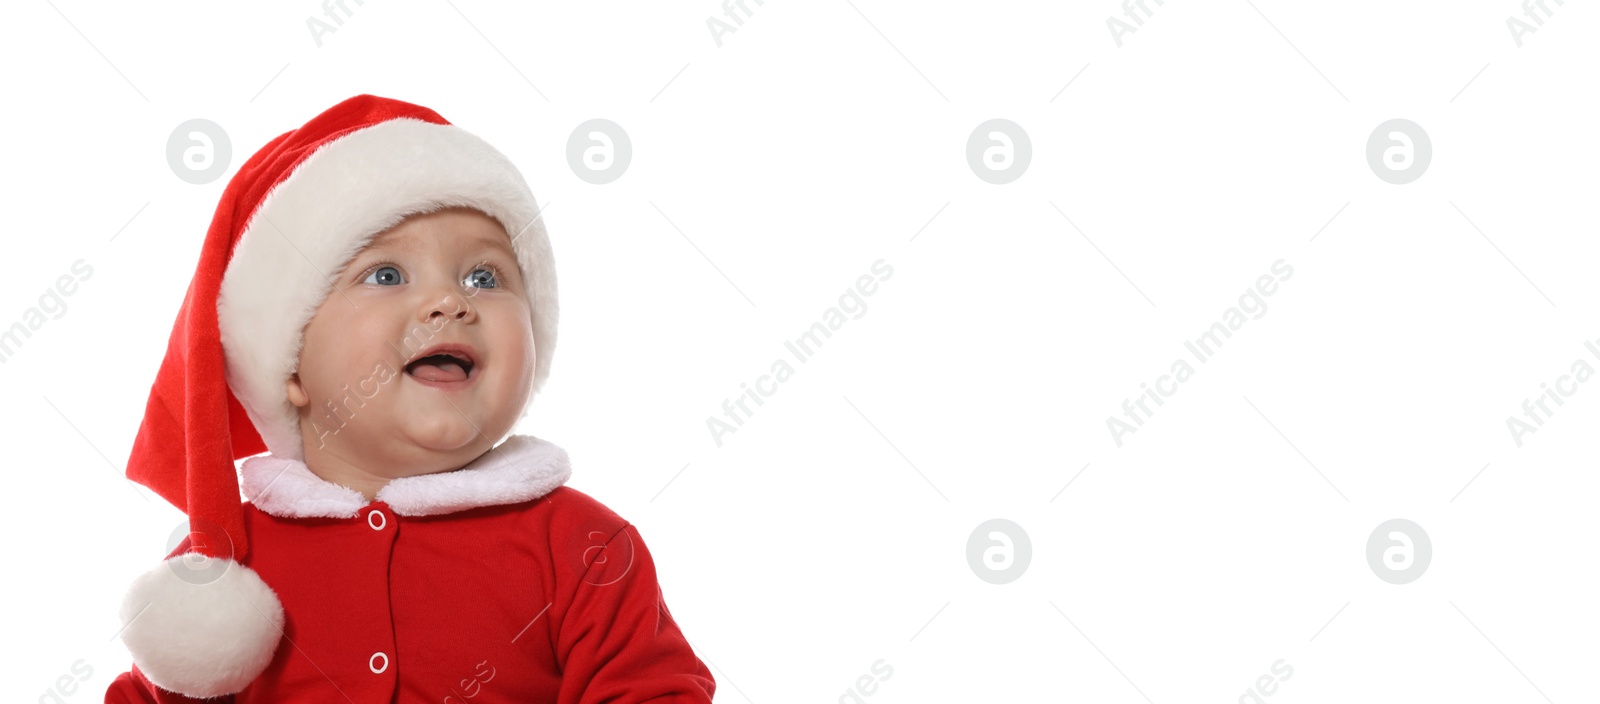 Image of Cute baby wearing Christmas costume on white background. Banner design